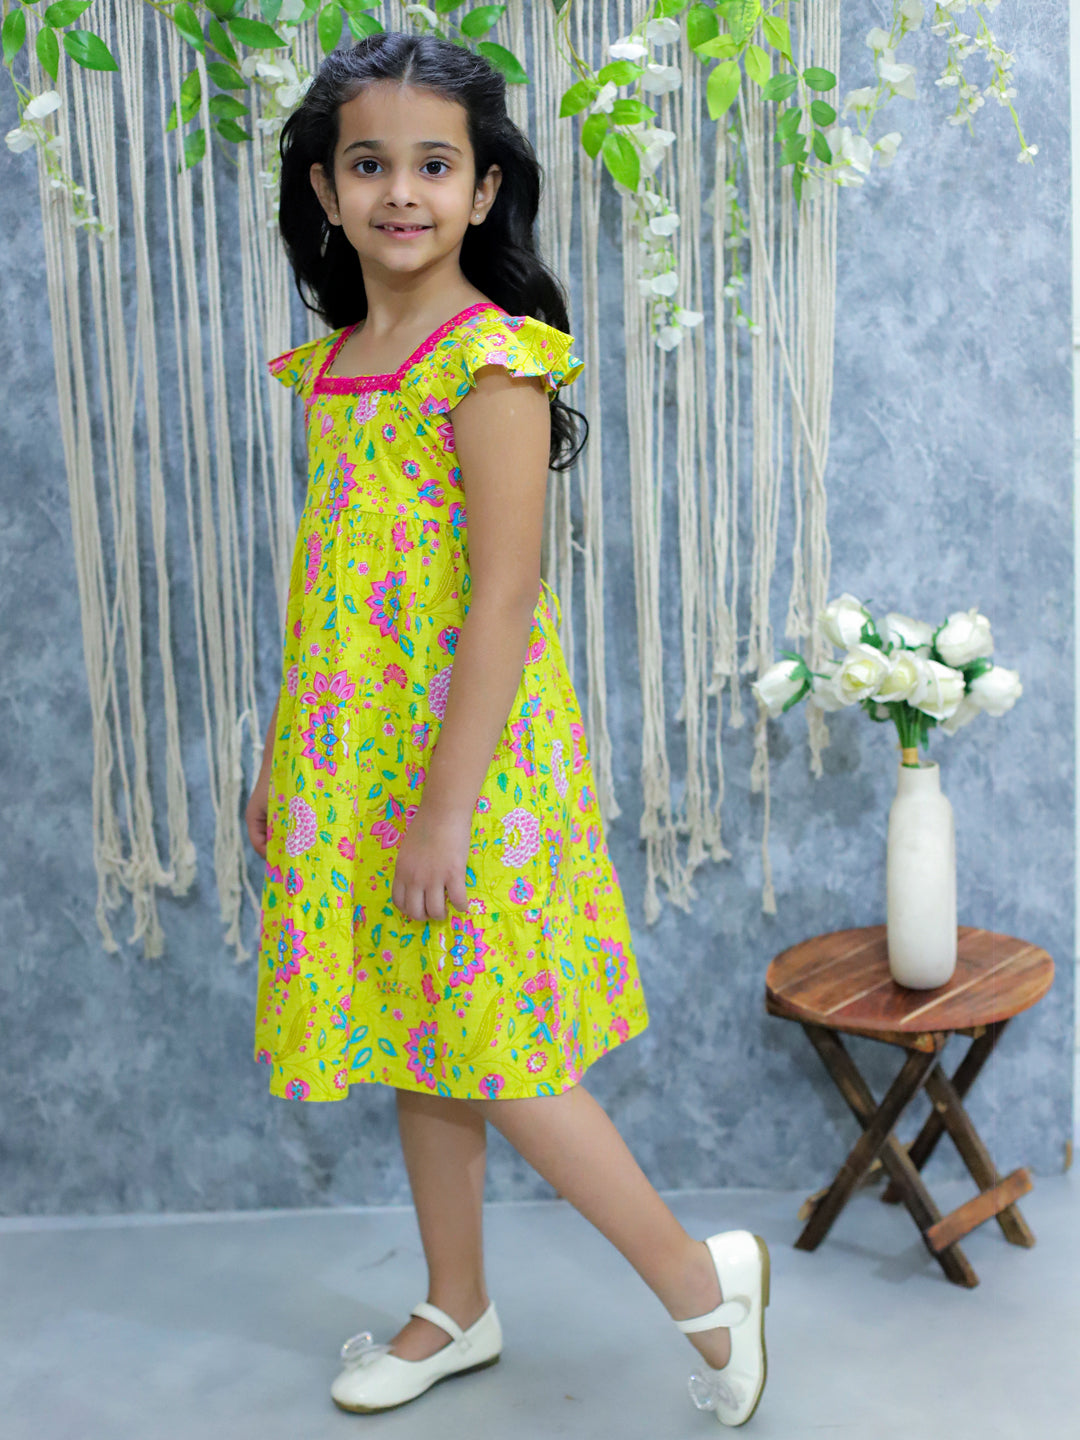 BownBee Pure Printed Cotton Tier Summer Frock for Girls - Yellow